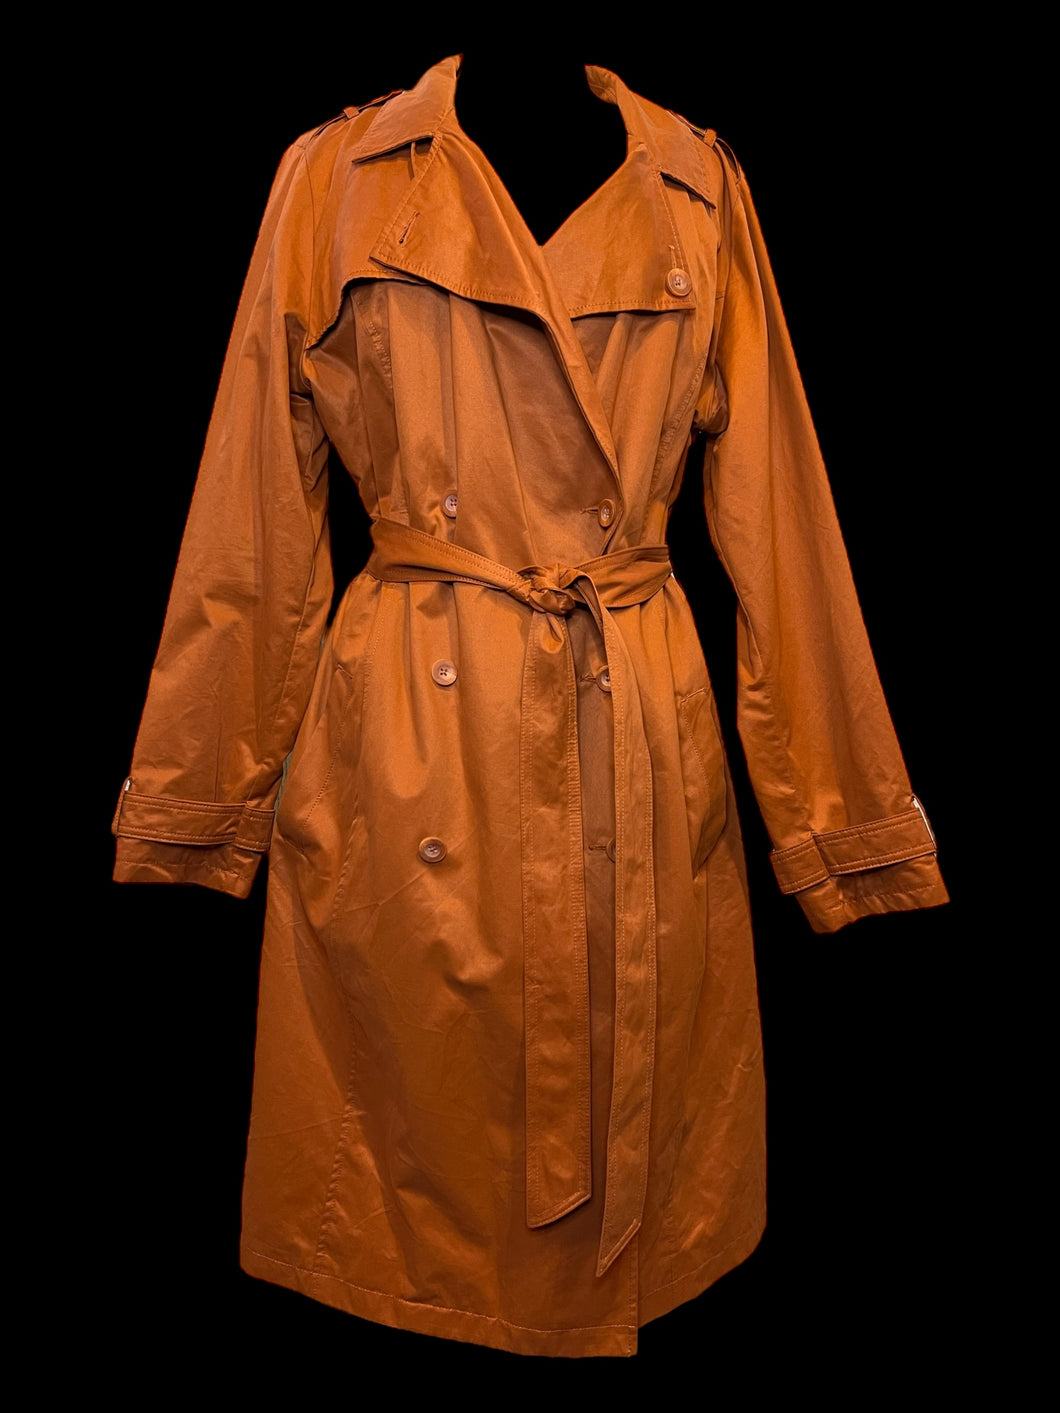 0X Burnt orange double breasted collared jacket w/ pockets, belt loops, & fabric waist tie